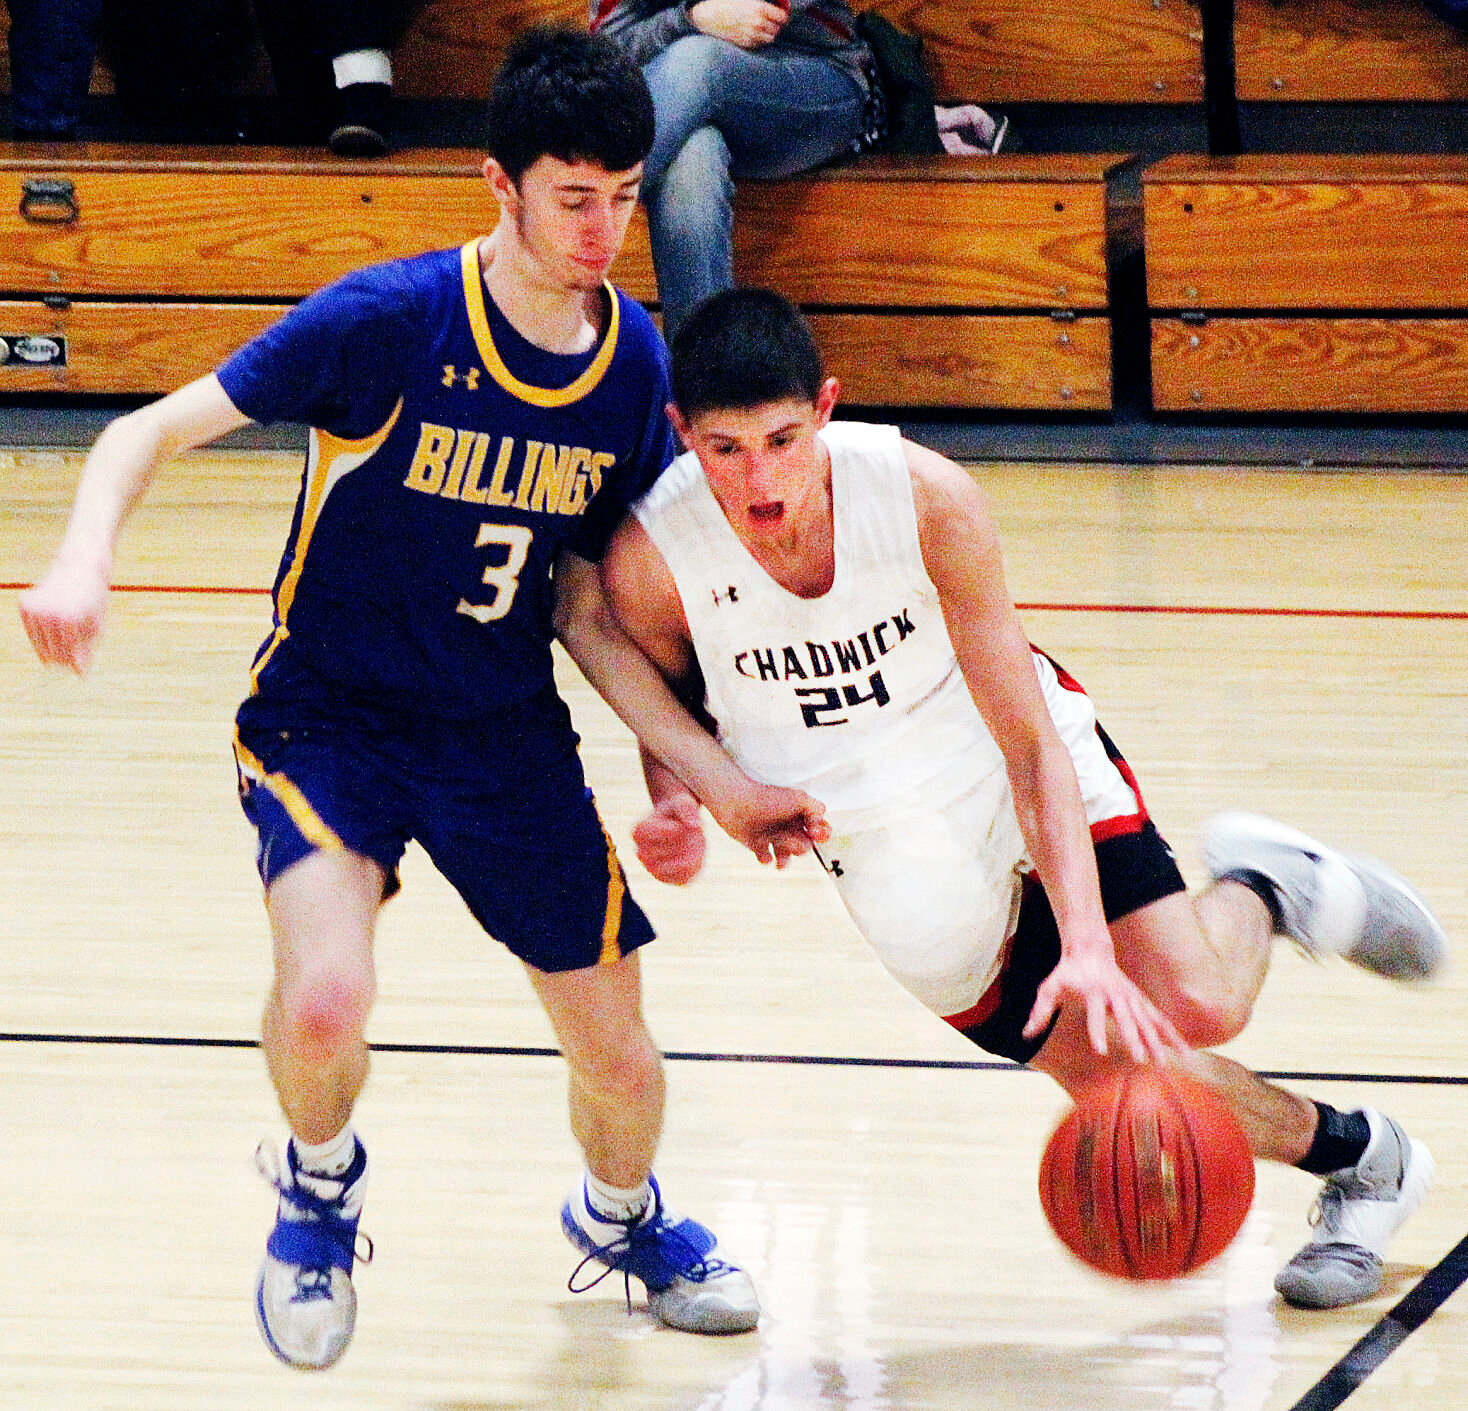 CHADWICK'S PADEN GILBERT drives to the hoop in action last season.